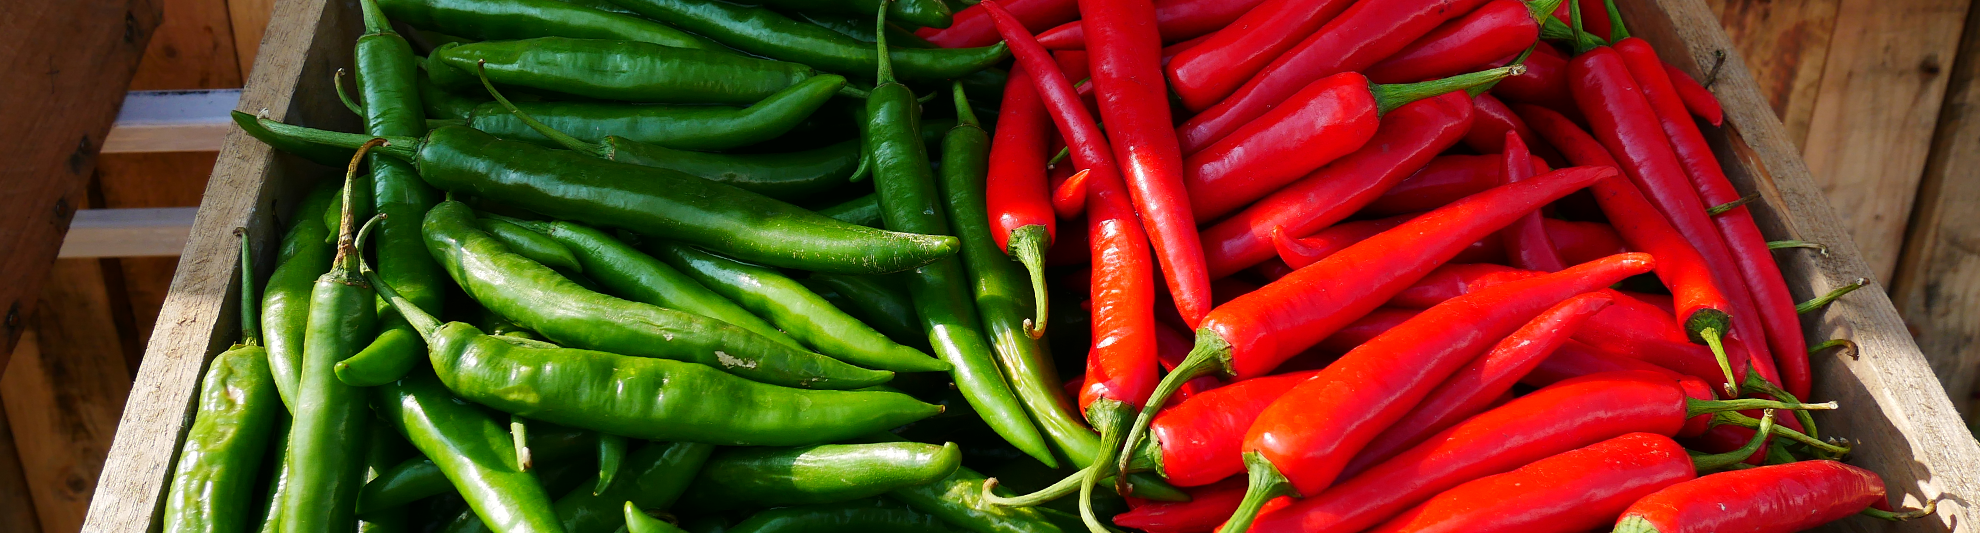 image of red and green chile